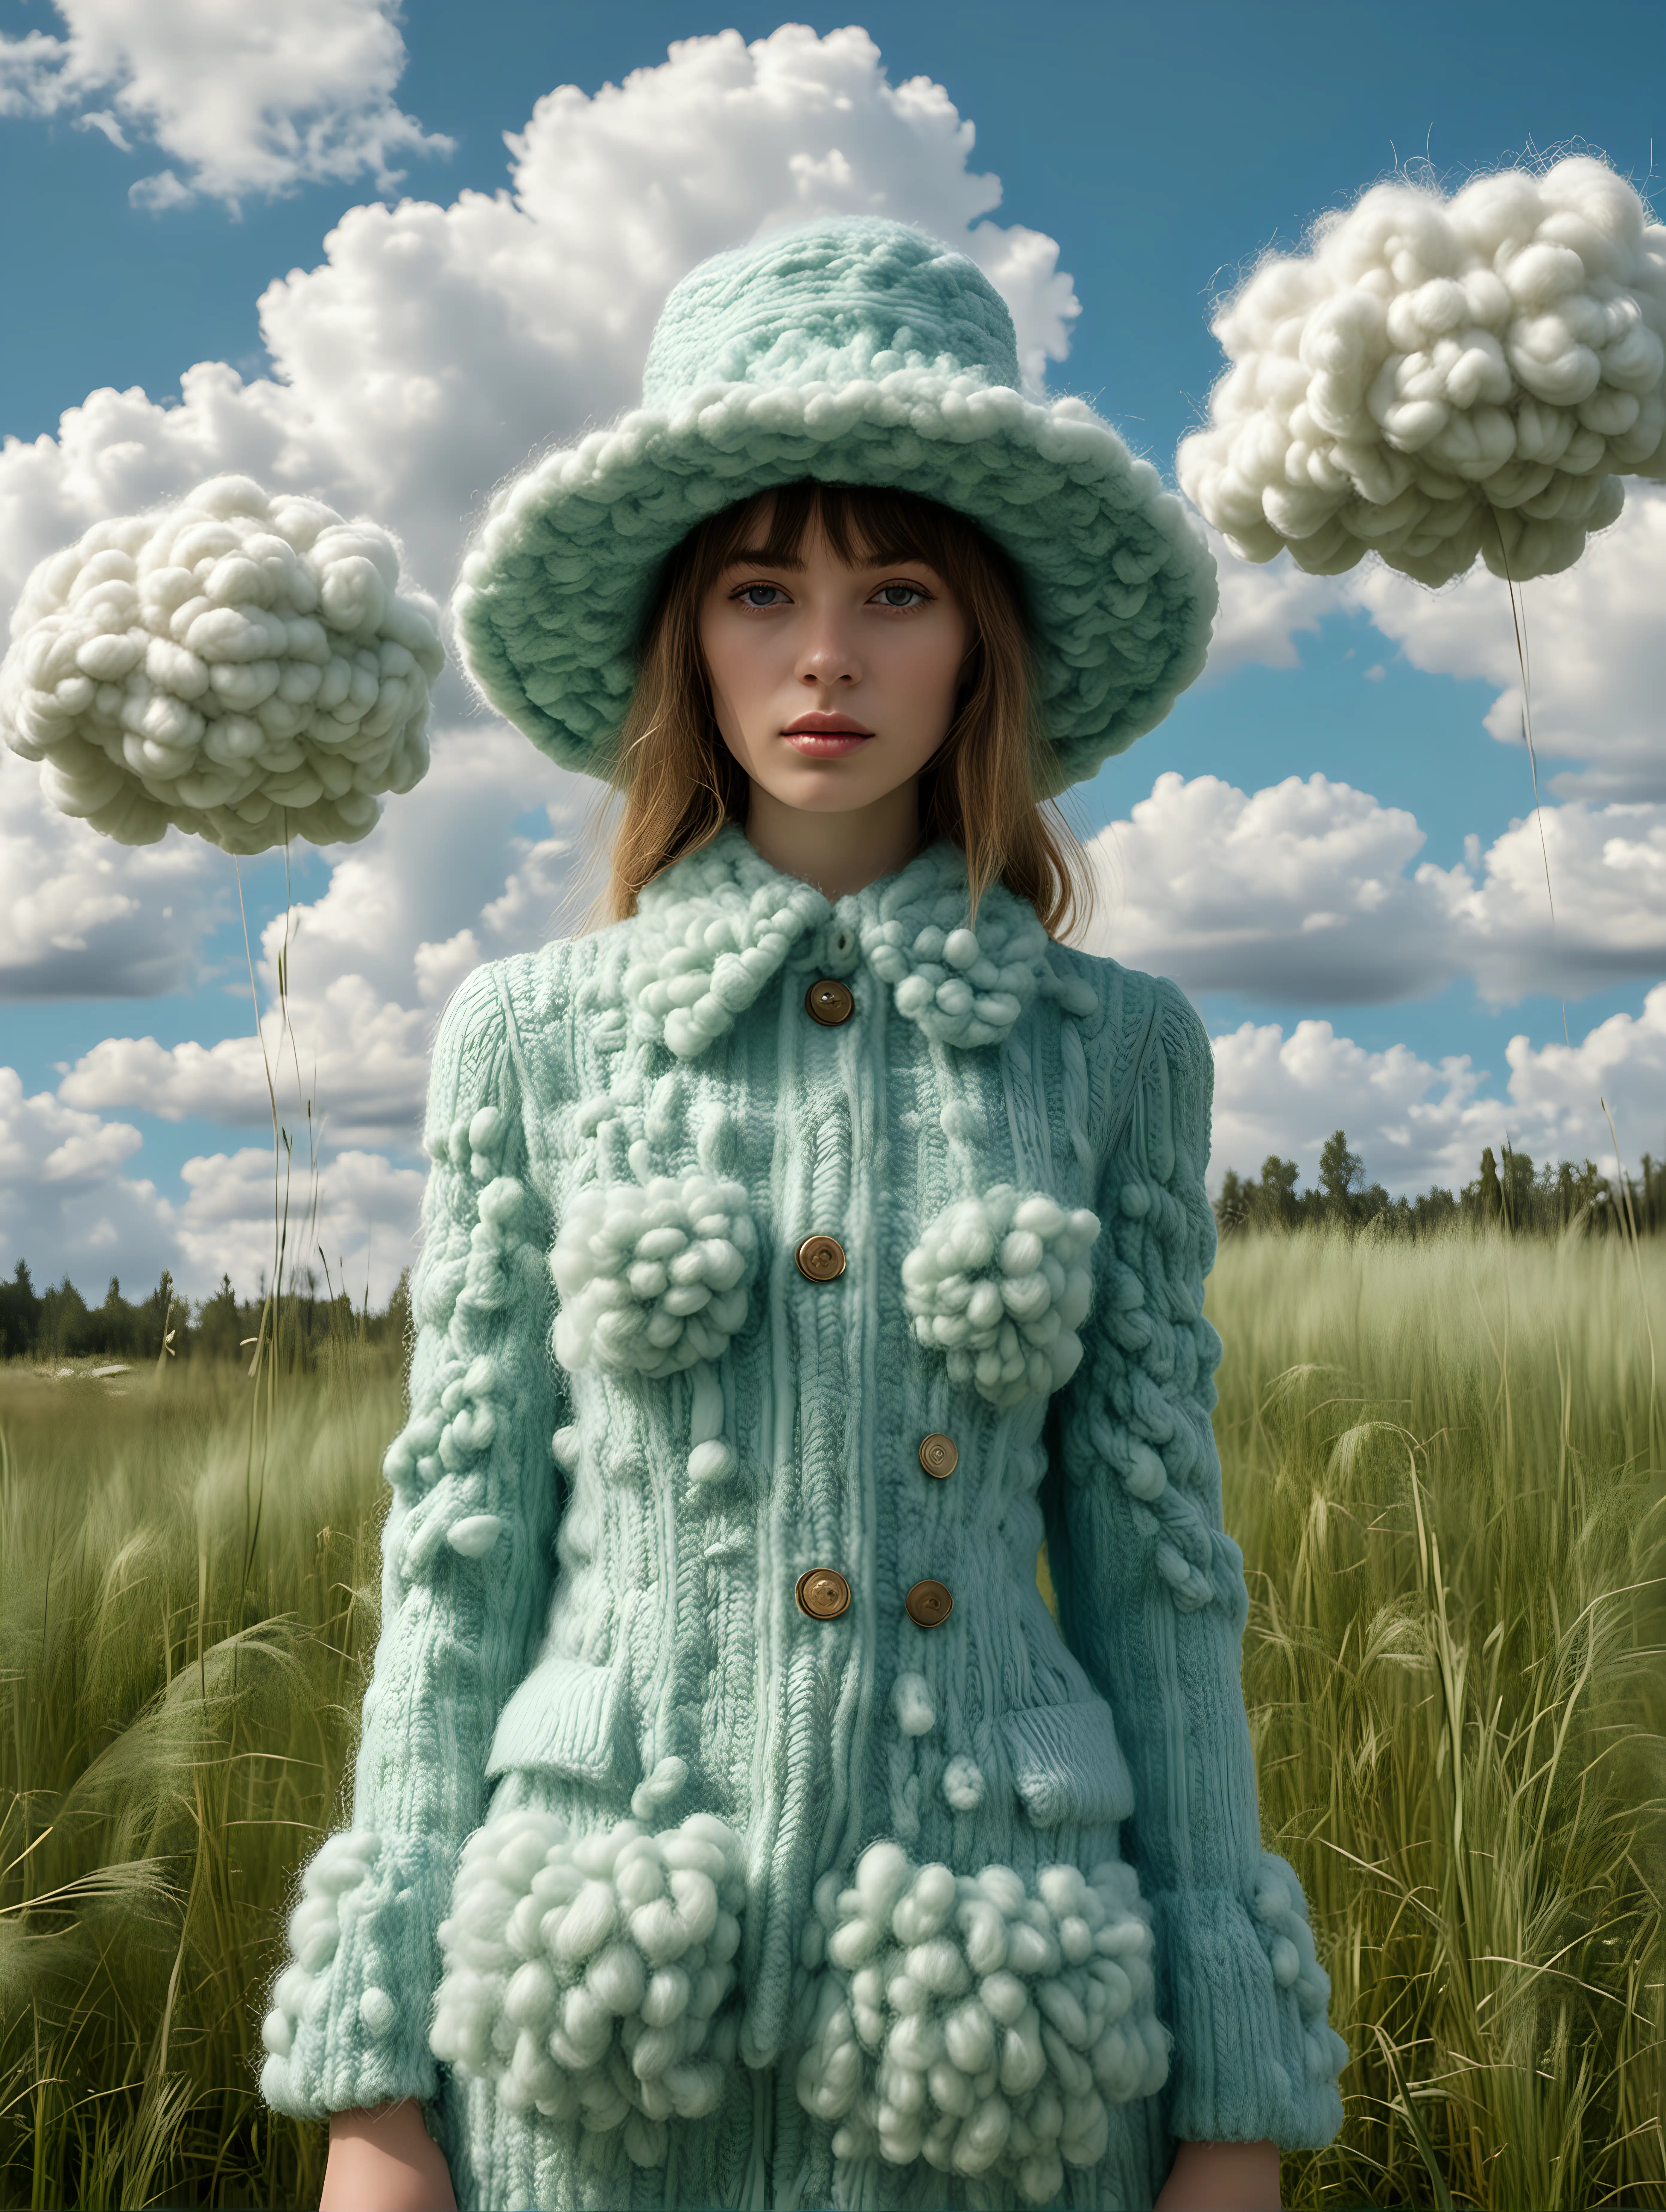 Surrealistic wool clouds made from wool Surreal Blue wool lake, white Wool in sky, green wool looks like grass from wool, close up two innocent young woman wearing Balmain inspired clothing  with cool hat from kraftwerk white wool abstract wool scene, everything made from wool, sky from wool, wool wool grass, dramatic